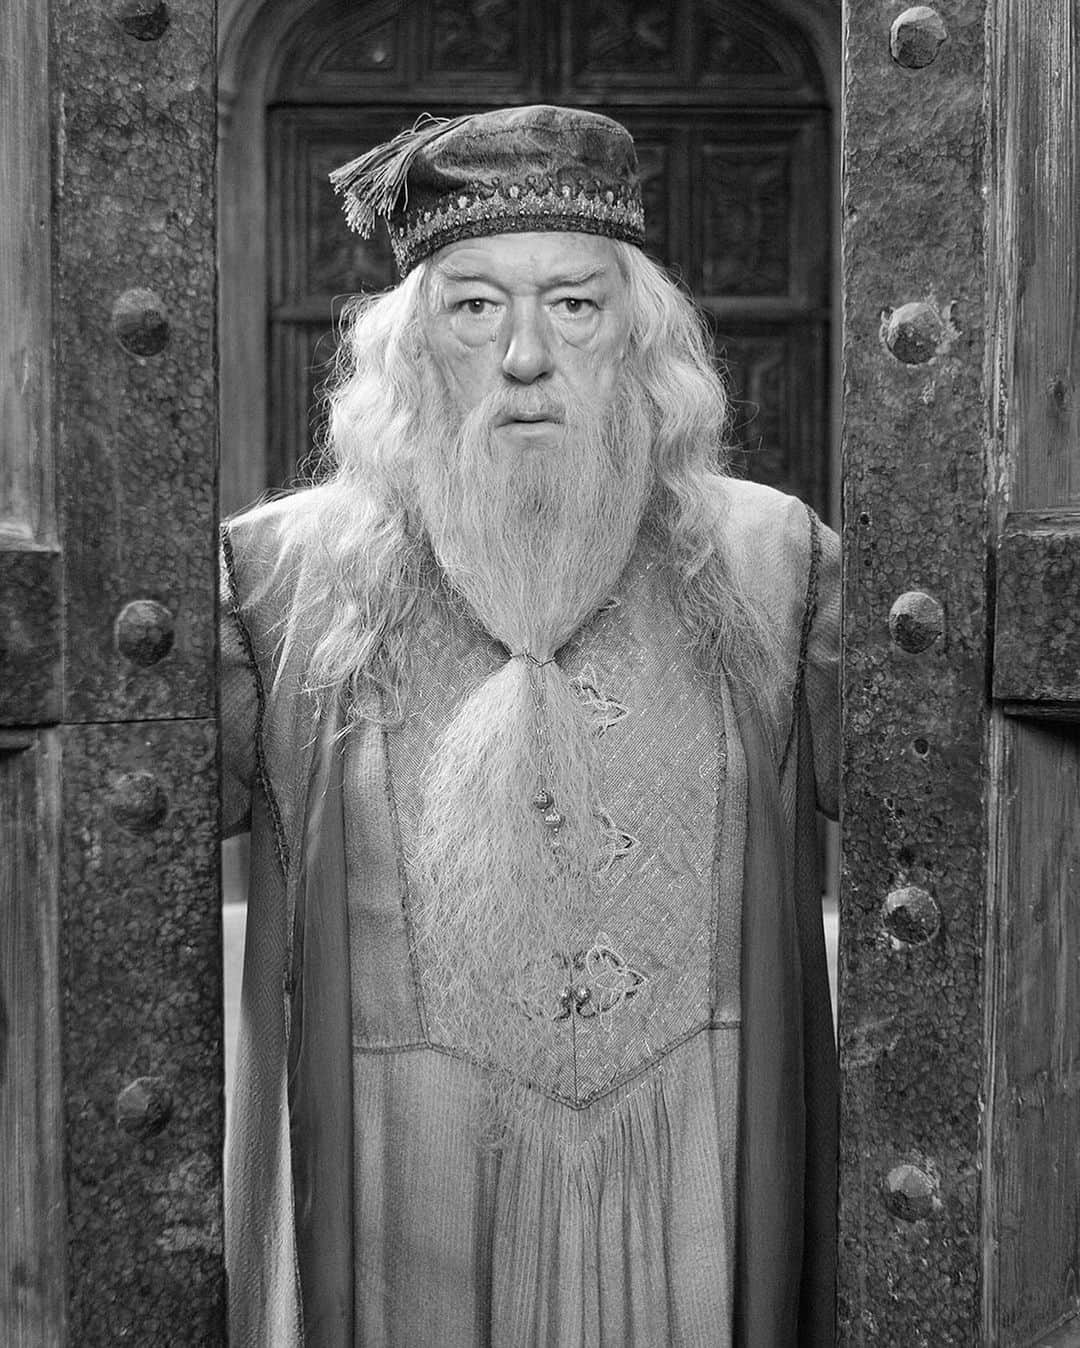 Warner Bros. Picturesのインスタグラム：「Repost from @harrypotterfilm: We are incredibly saddened to hear of the passing of Sir Michael Gambon. He brought immeasurable joy to Harry Potter fans from all over the world with his humour, kindness and grace. We will forever hold his memory in our hearts.」